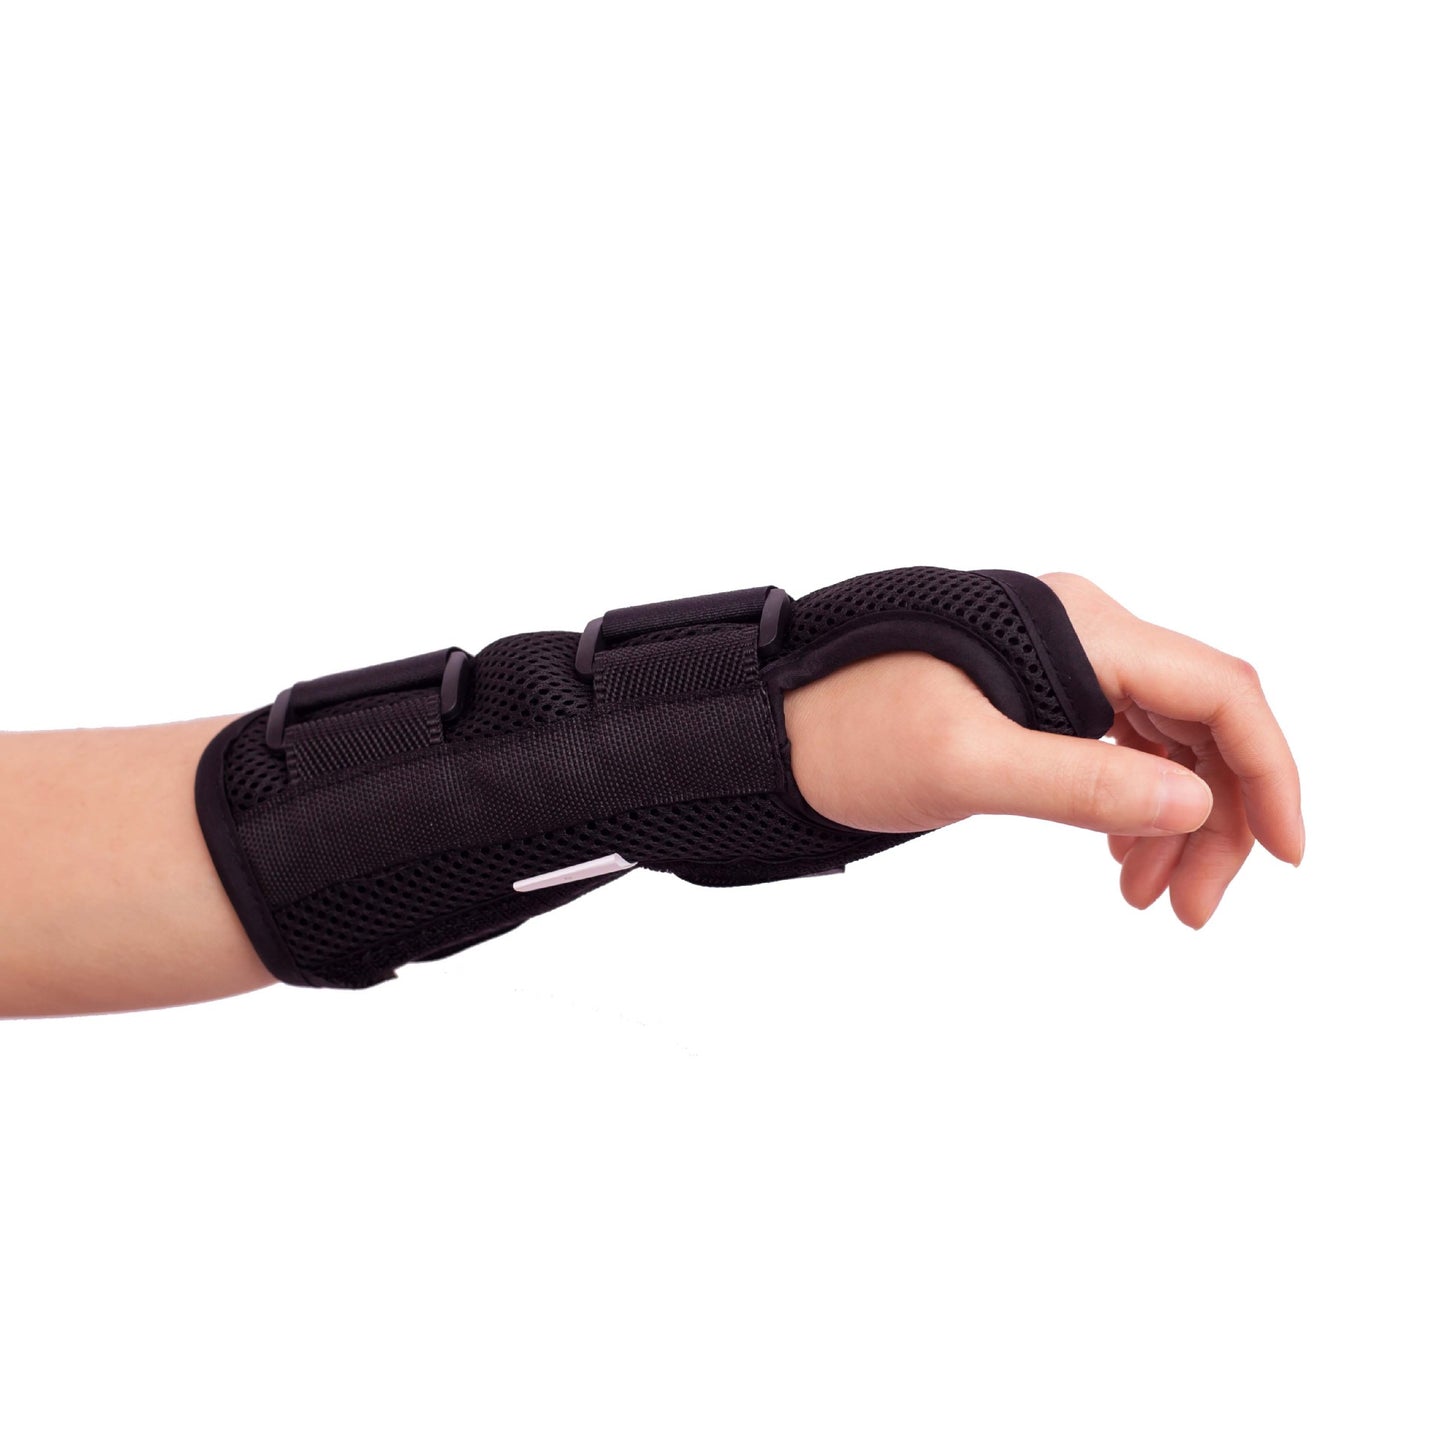 Bullet Proof Brace- Wrist Brace with Fixation Support Plate